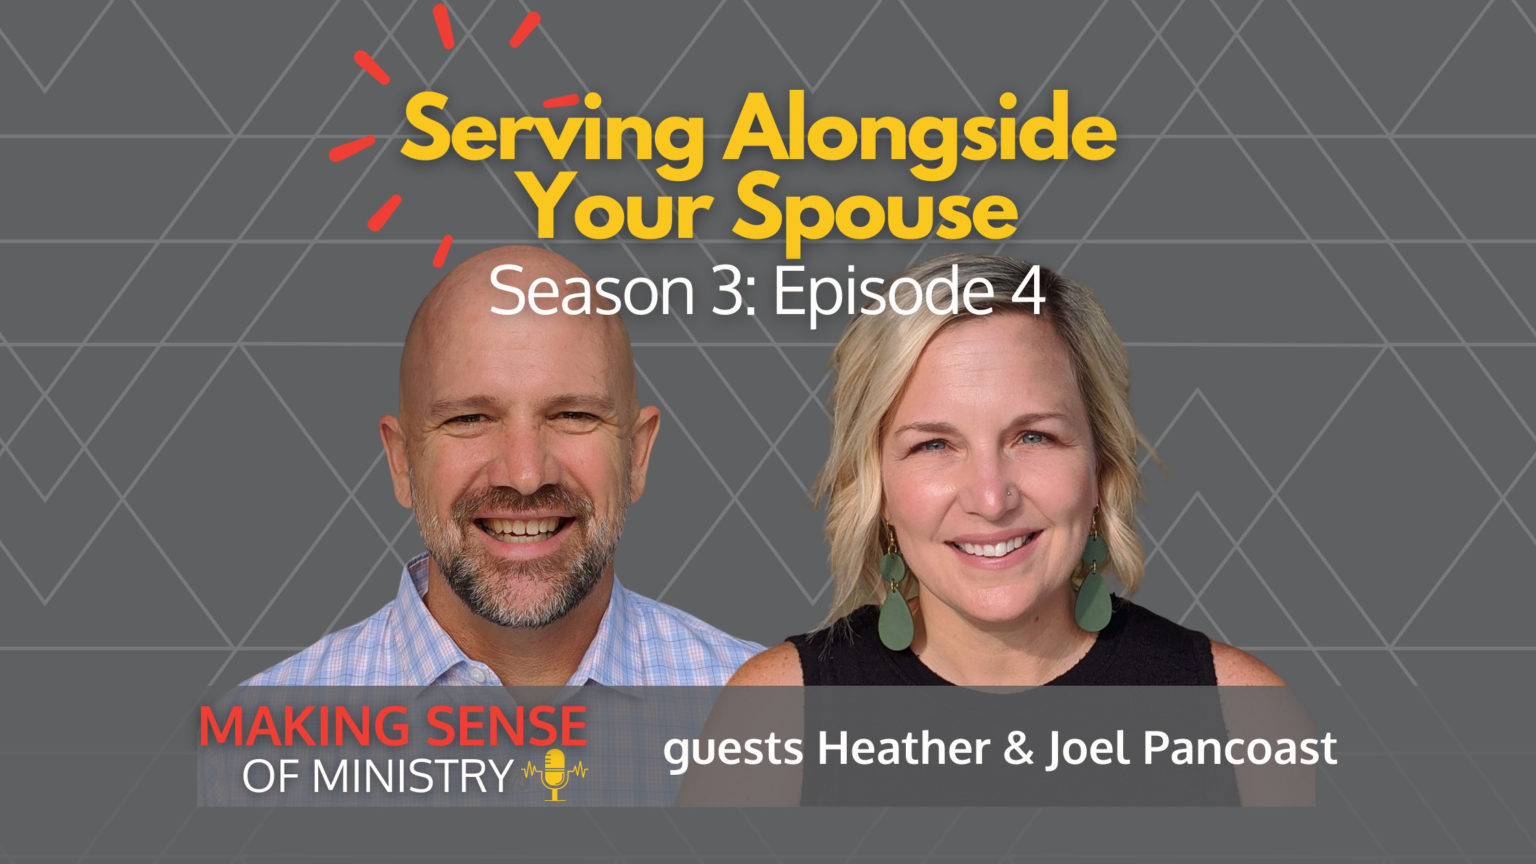 Season 3: Episode 4 of the Making Sense of Ministry podcast - ministry & marriage